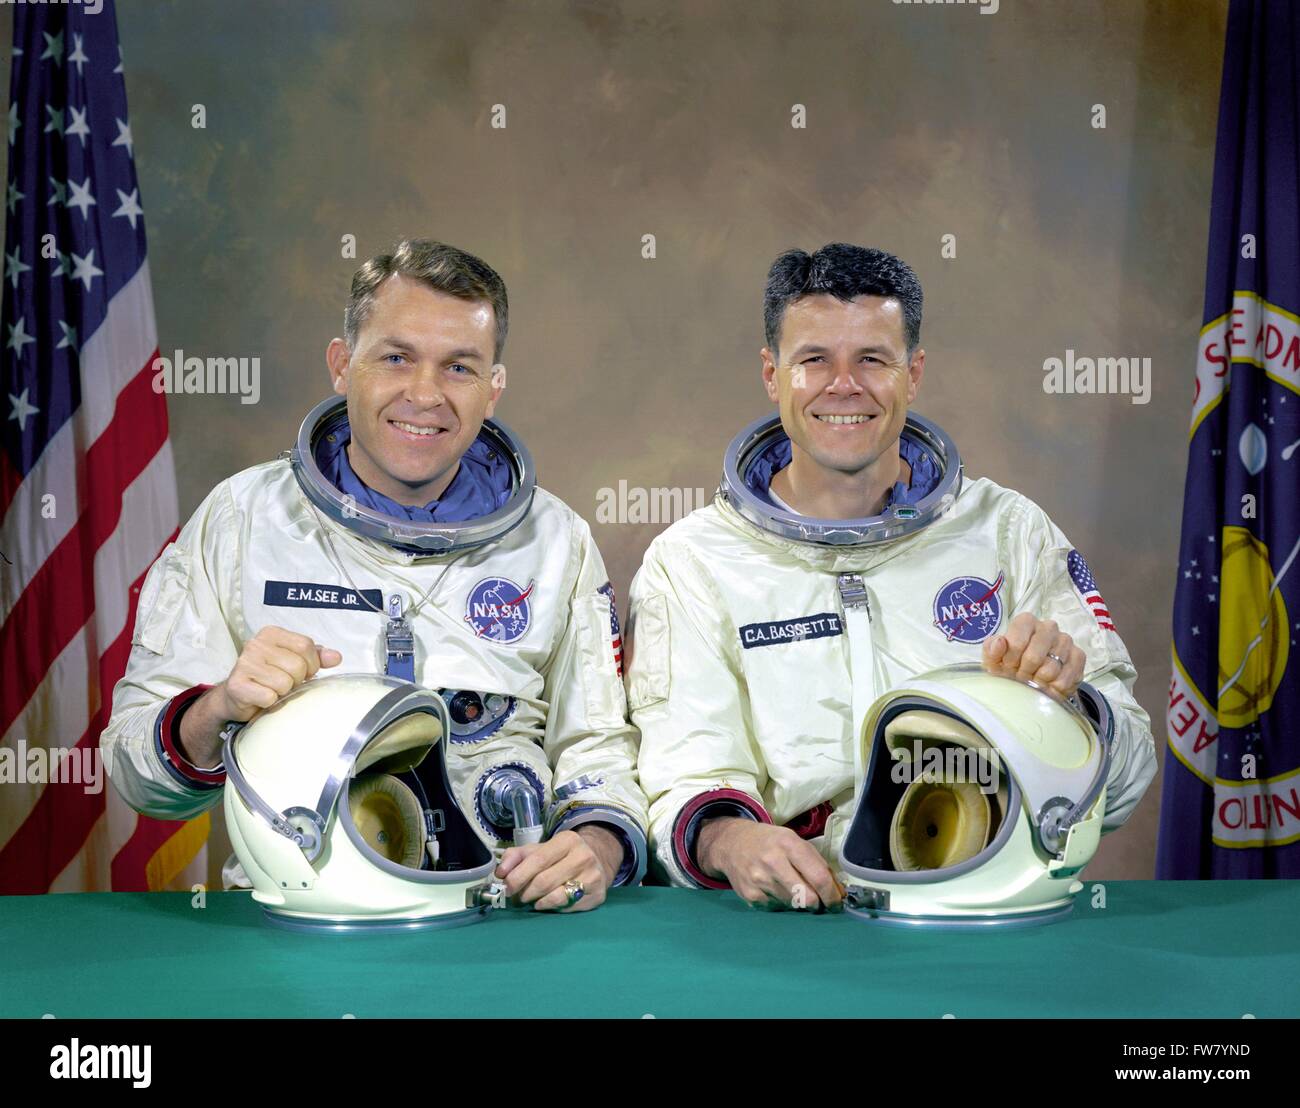 The original Gemini 9 space mission prime crew members Commander, Elliot M. See Jr., left, and pilot Charles A. Bassett II, in their spacesuits at the Johnson Space Center January 5, 1966 in Houston, Texas. The back-up crew became the prime crew when on February 28, 1966, the original prime crew was killed when their twin seat T- 38 trainer jet aircraft crashed into a building during a landing approach in bad weather. Stock Photo